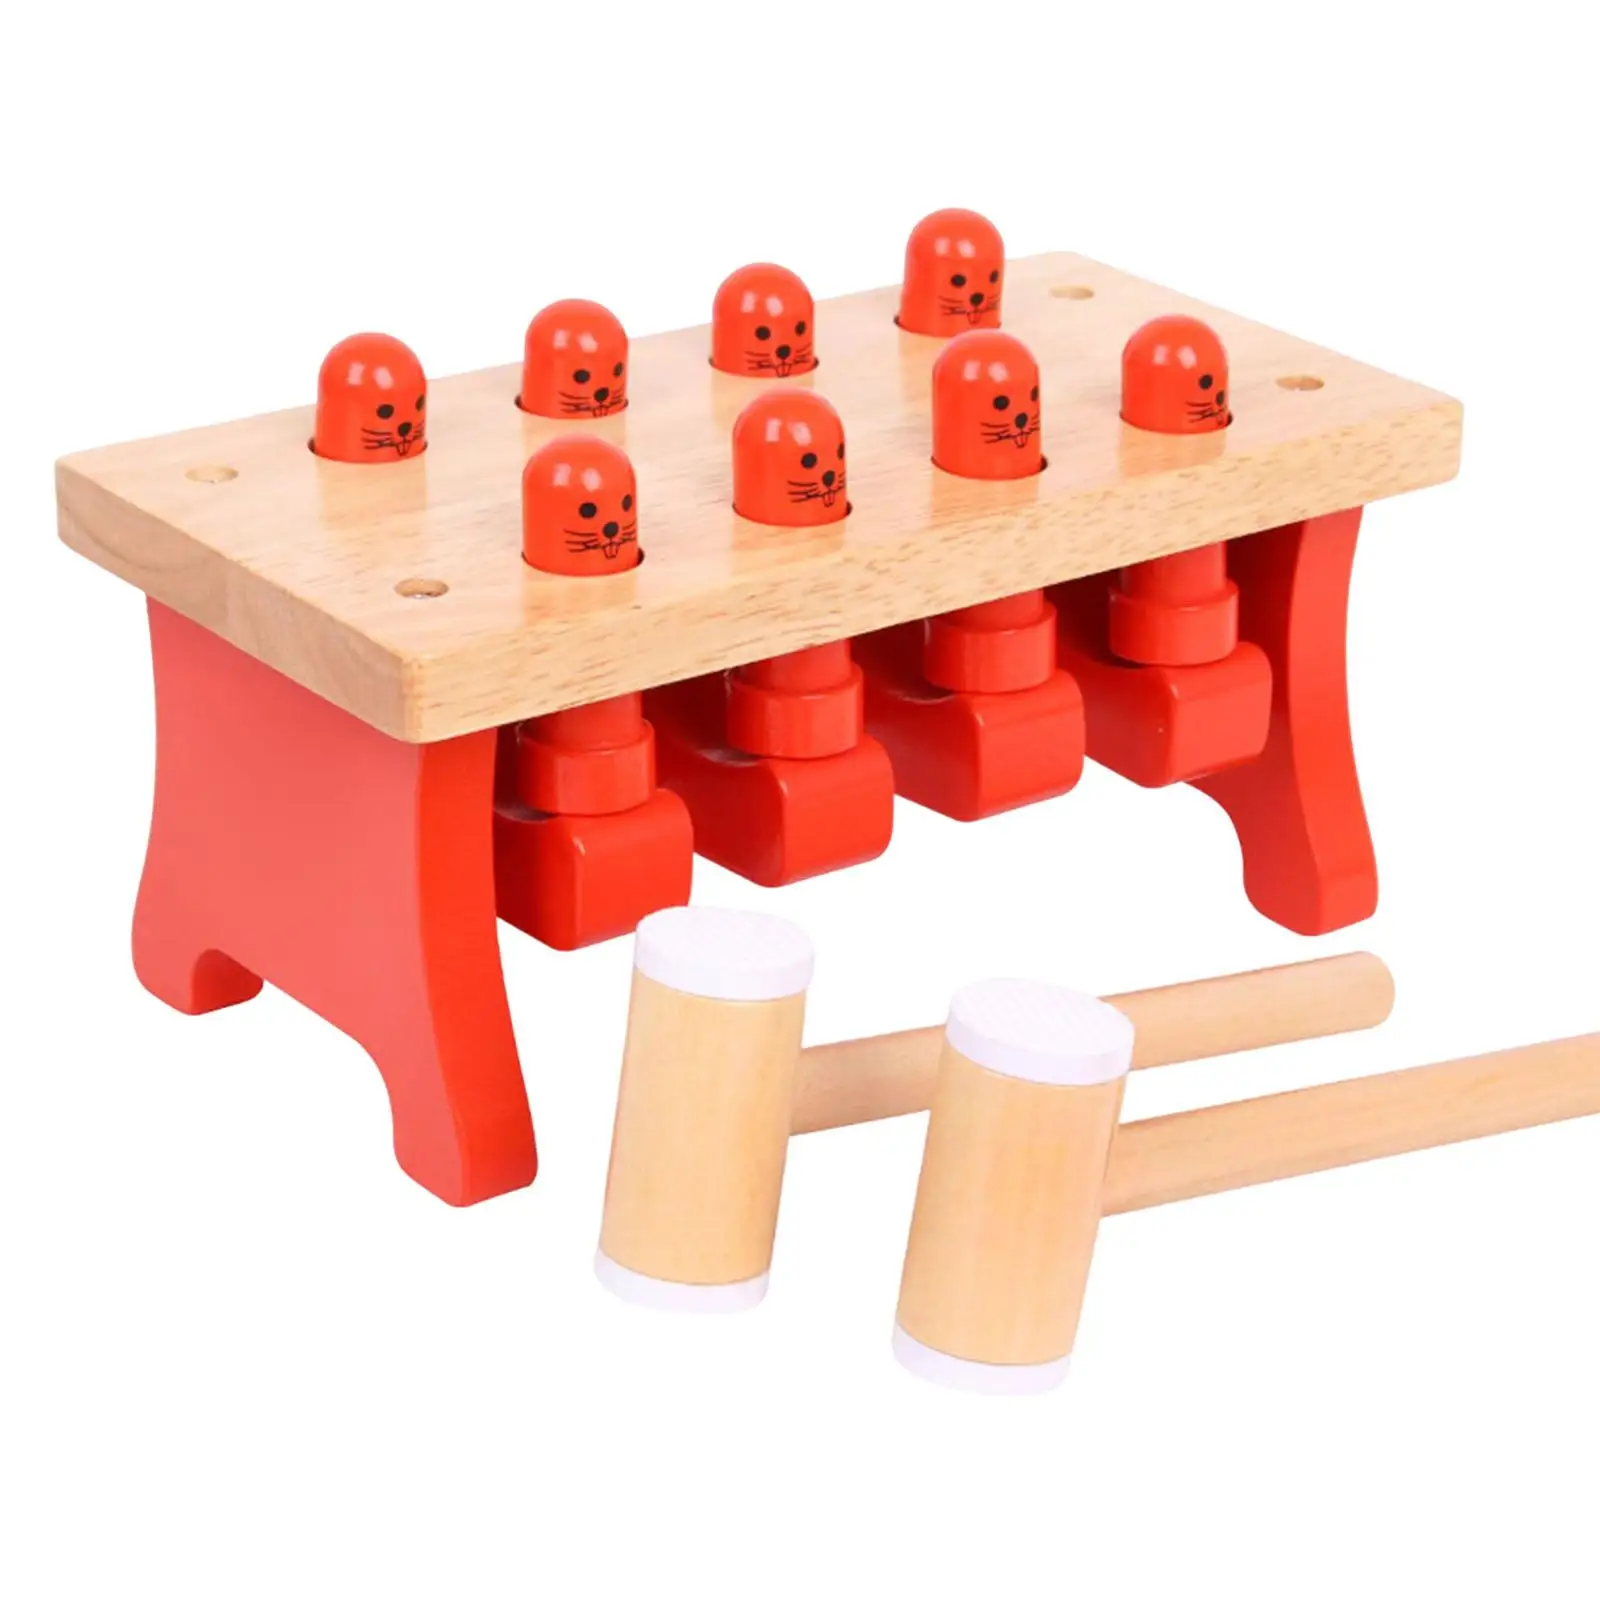 Fun Whack a Animal Game Puzzle Game with 2 Hammers Parent Child Interactive Hammer and Pounding Toy for Home Boys Unisex Girls